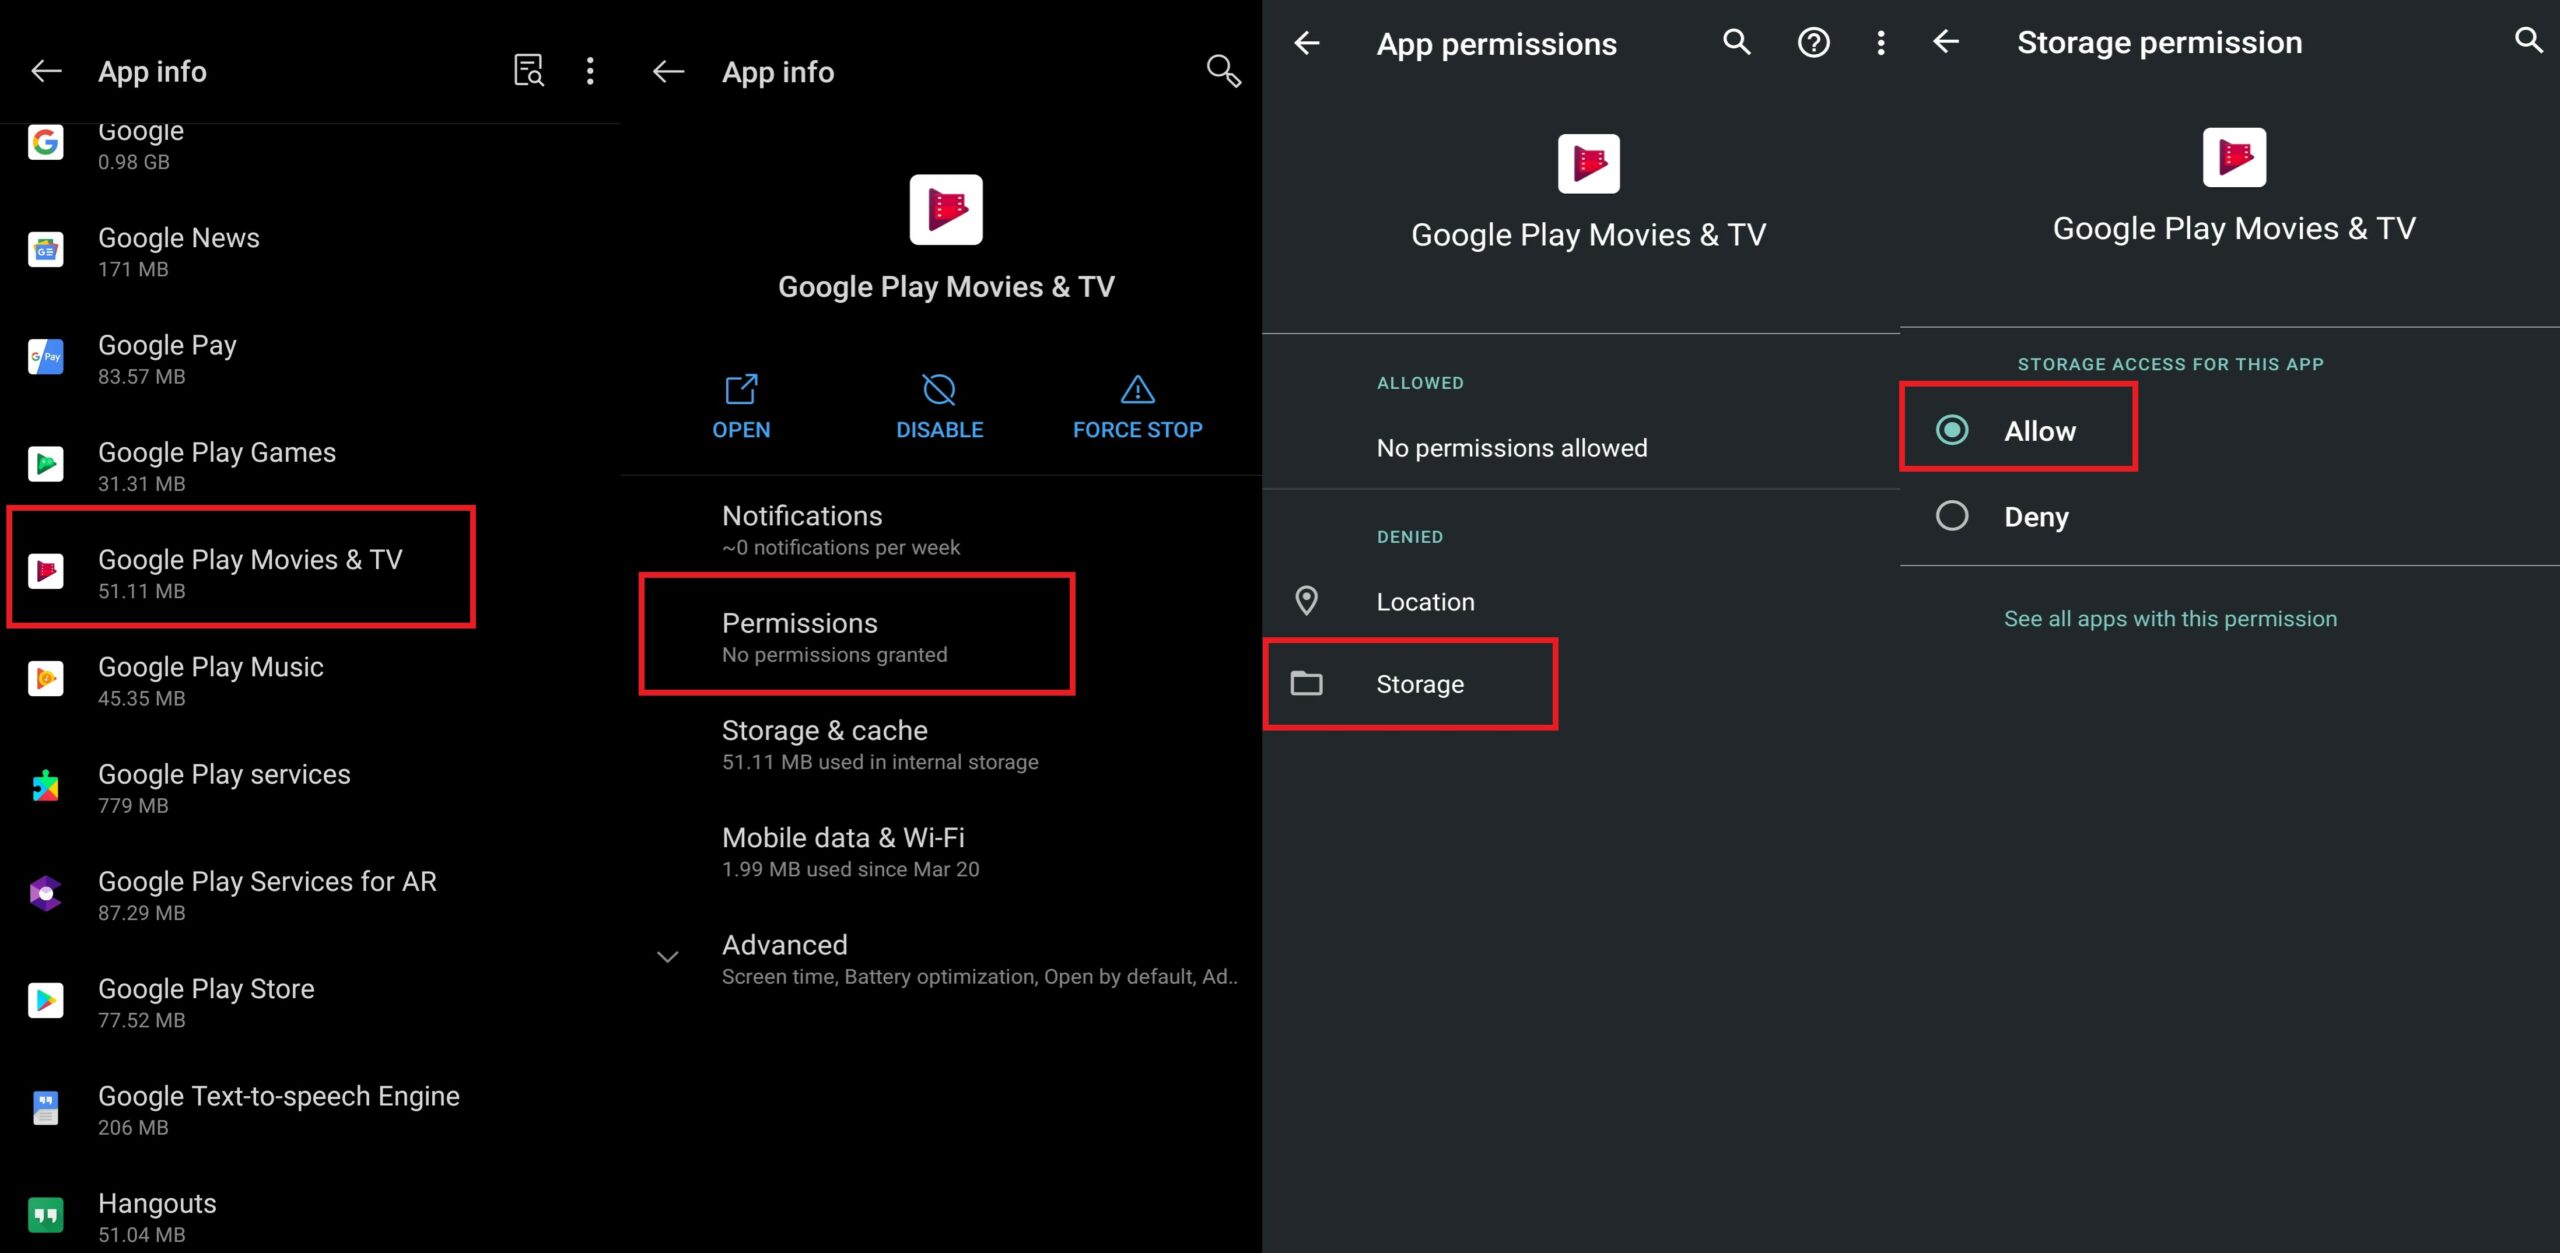 Enable storage permission for Google Play Movies and TV app